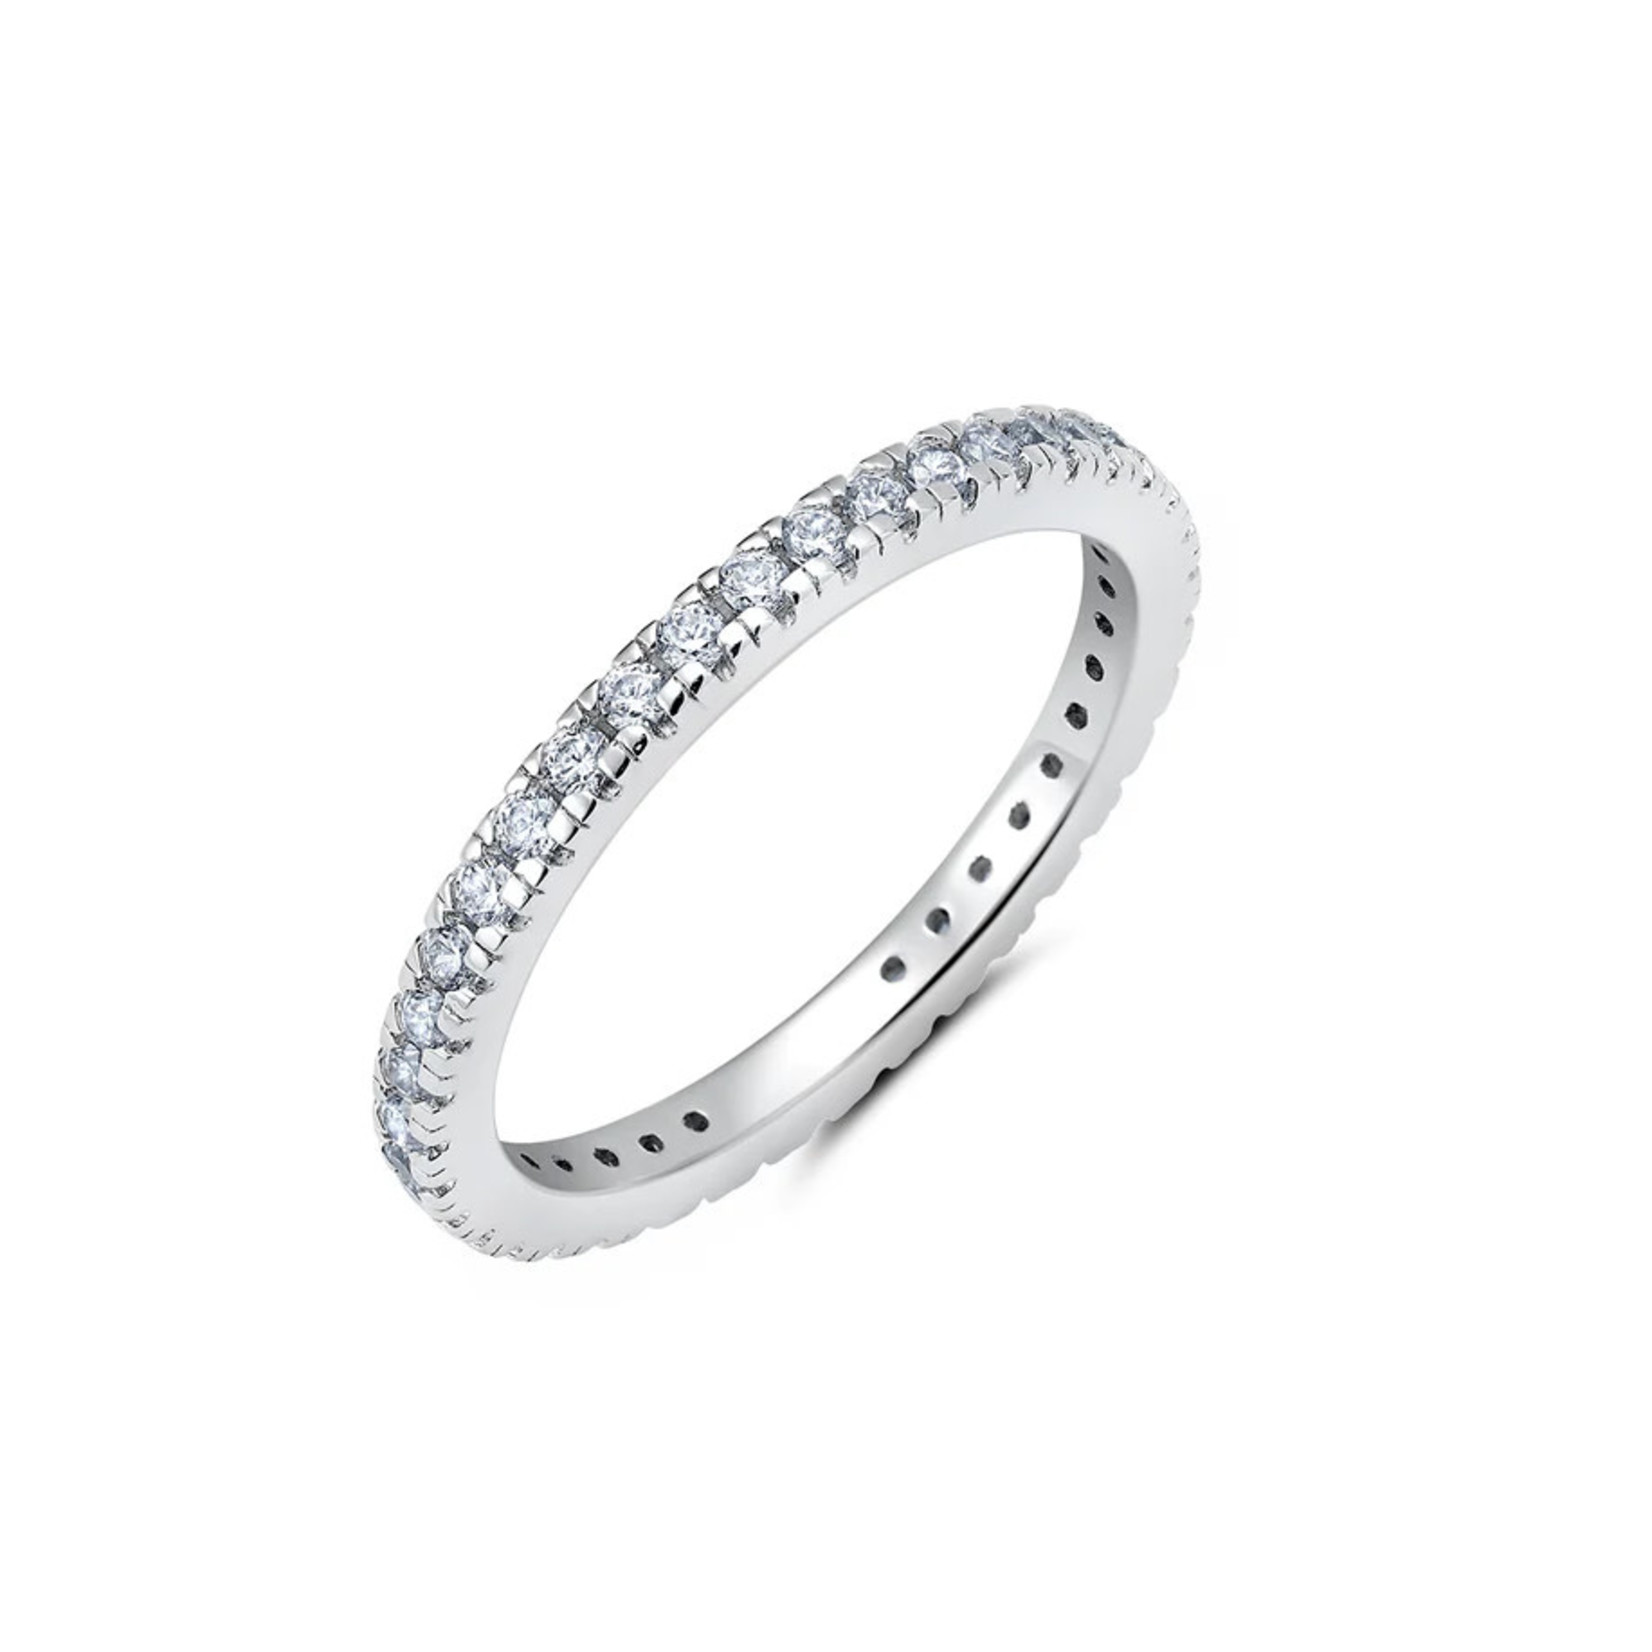 Clear Hand Set CZ Step Cut Eternity Band Ring Finished In Pure Platinum 9012277R60CZ